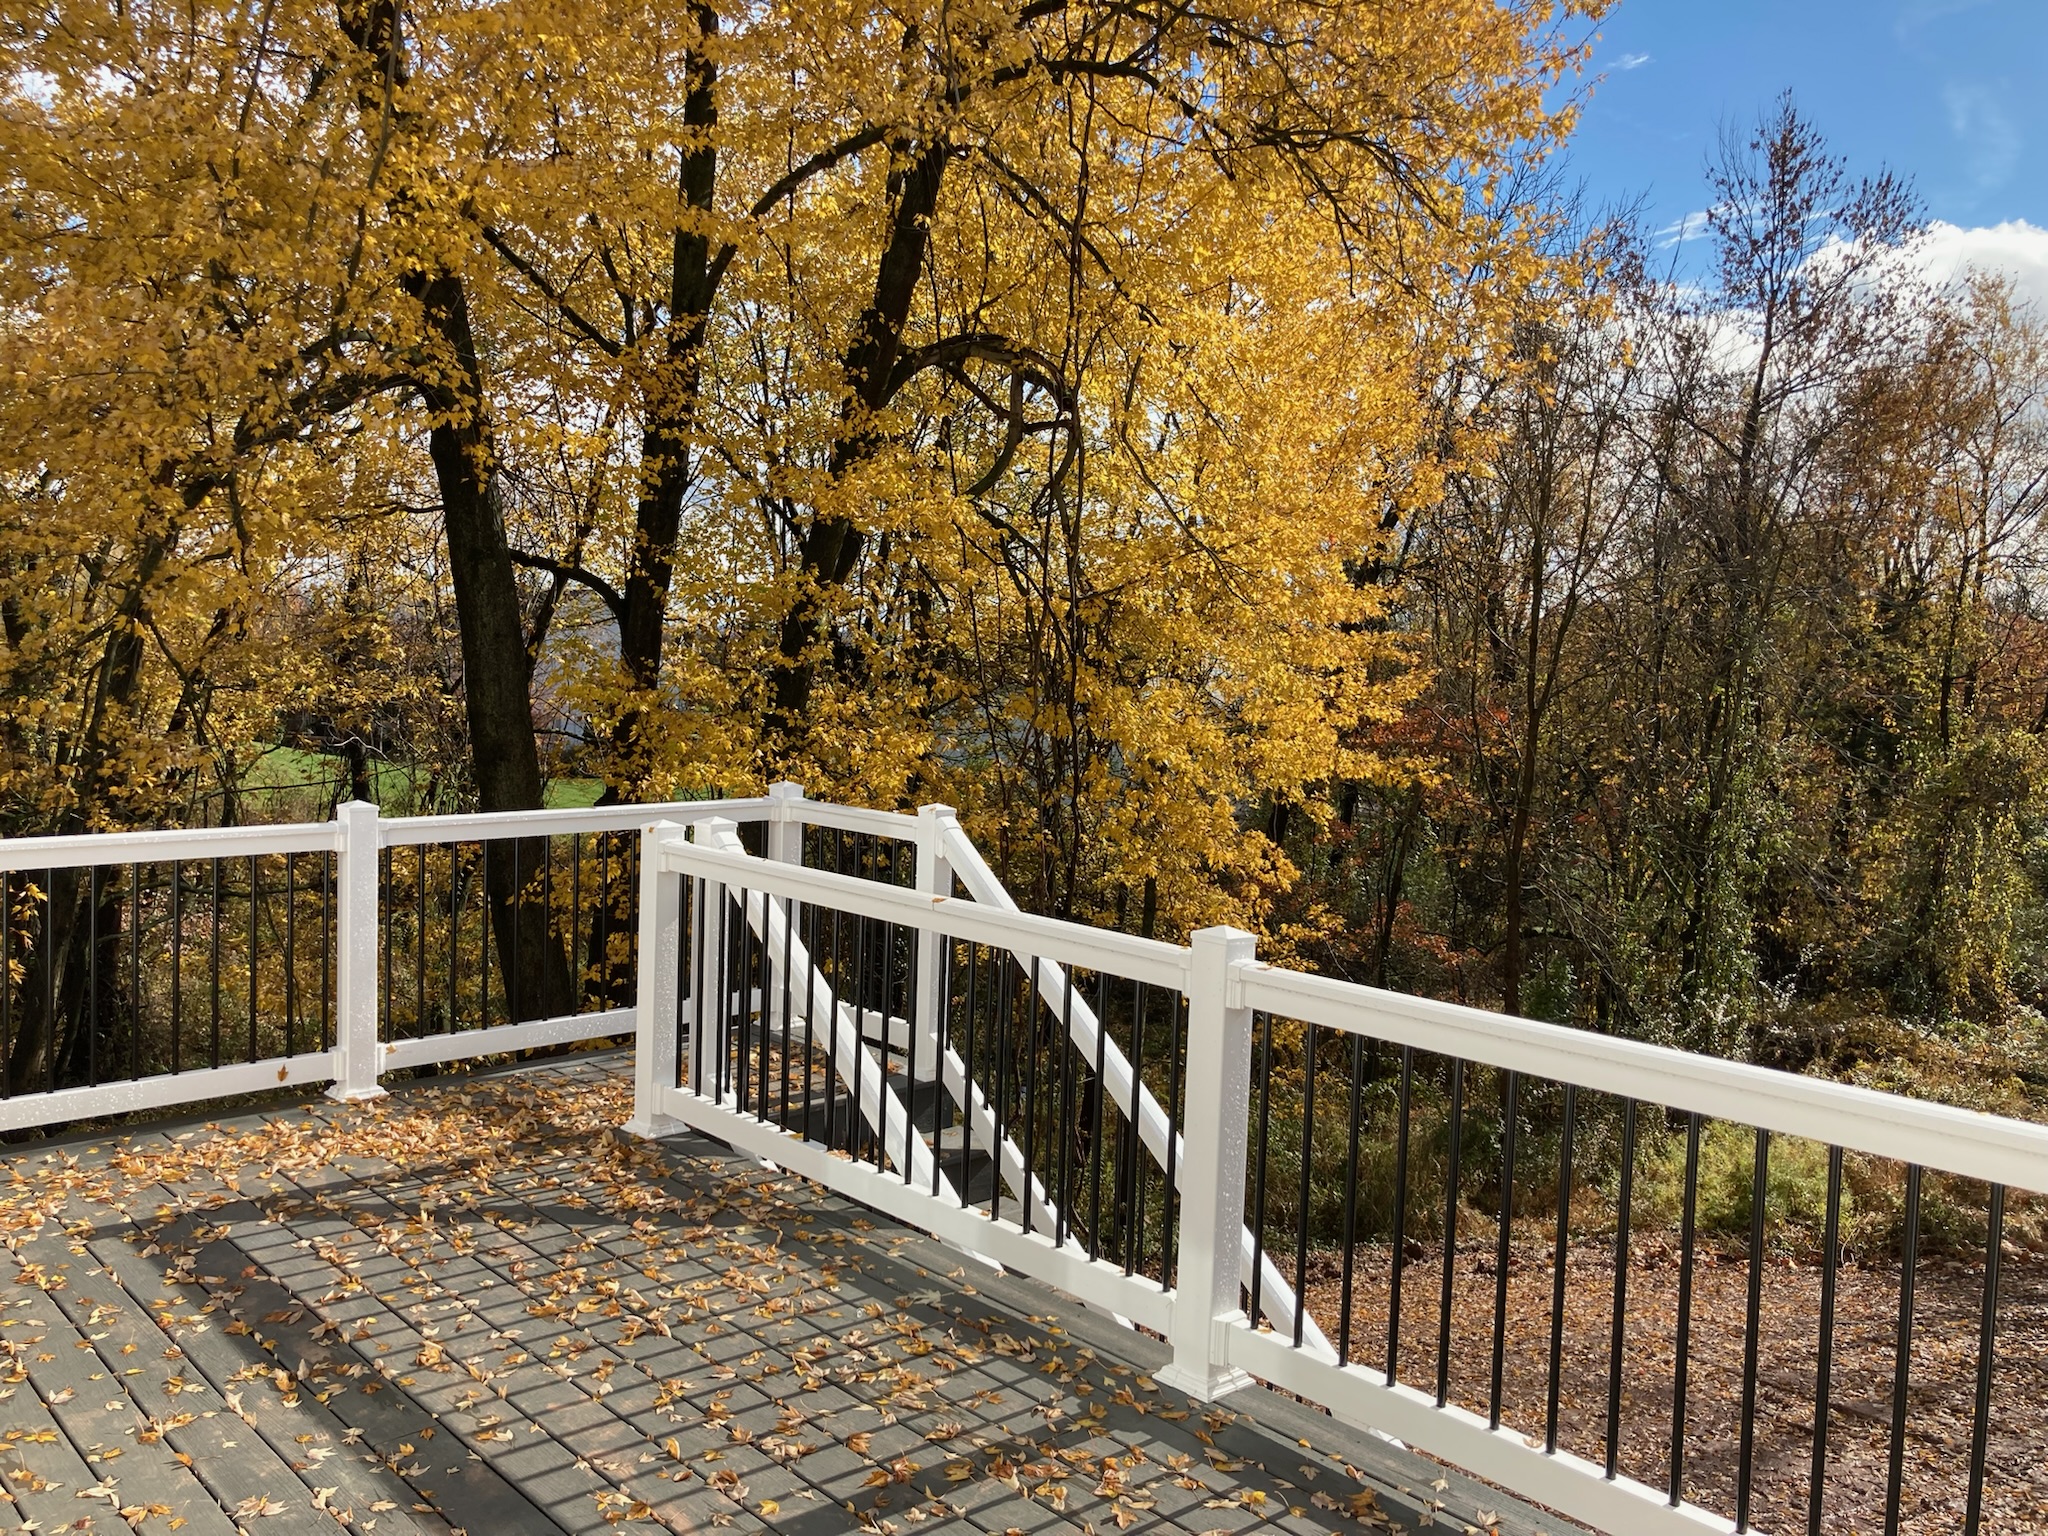 The back deck in autumn scenery